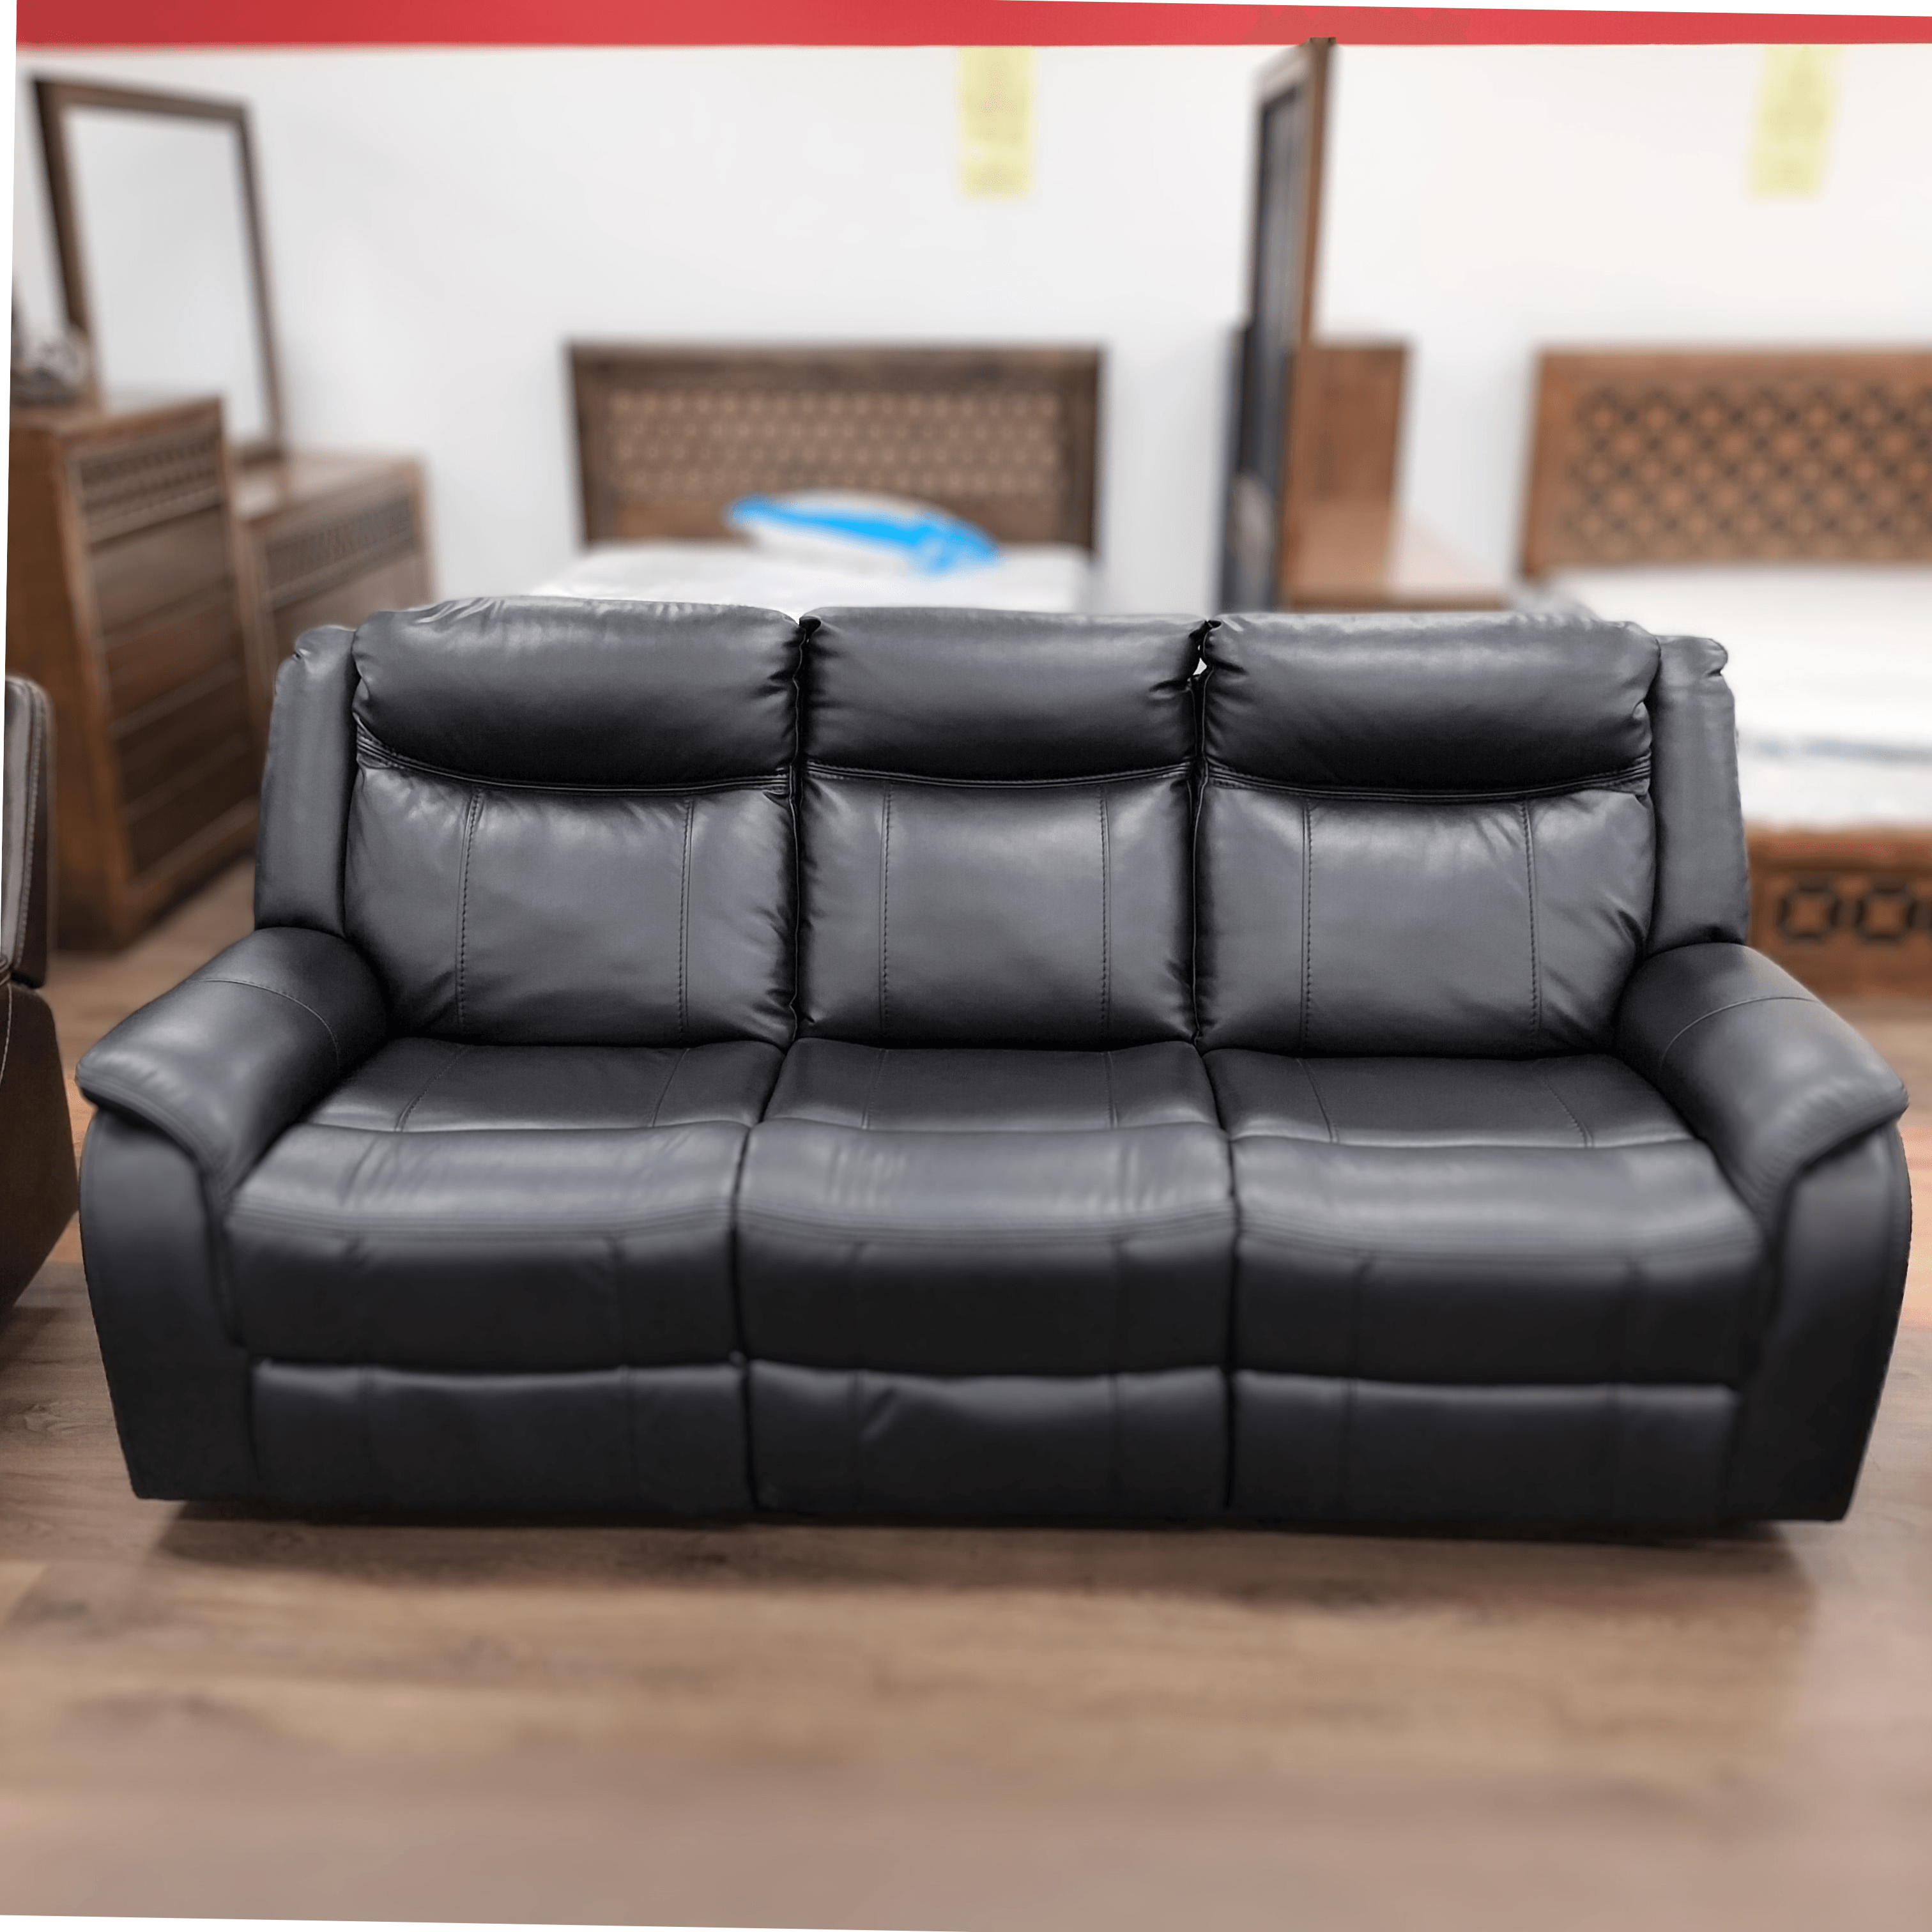 Sunshine 3 Seater Air Leather Recliner Lounge